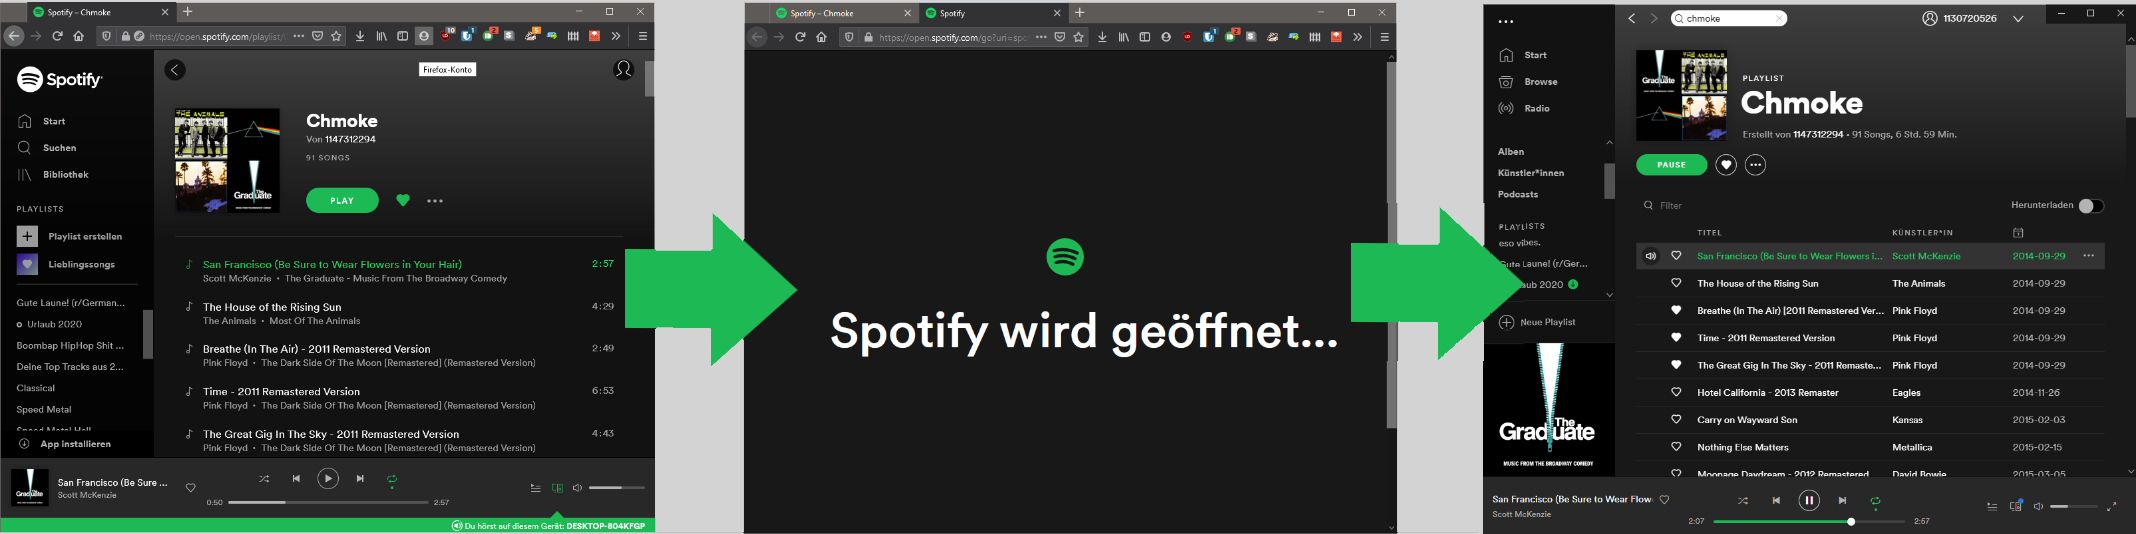 Redirect for Spotify promo image